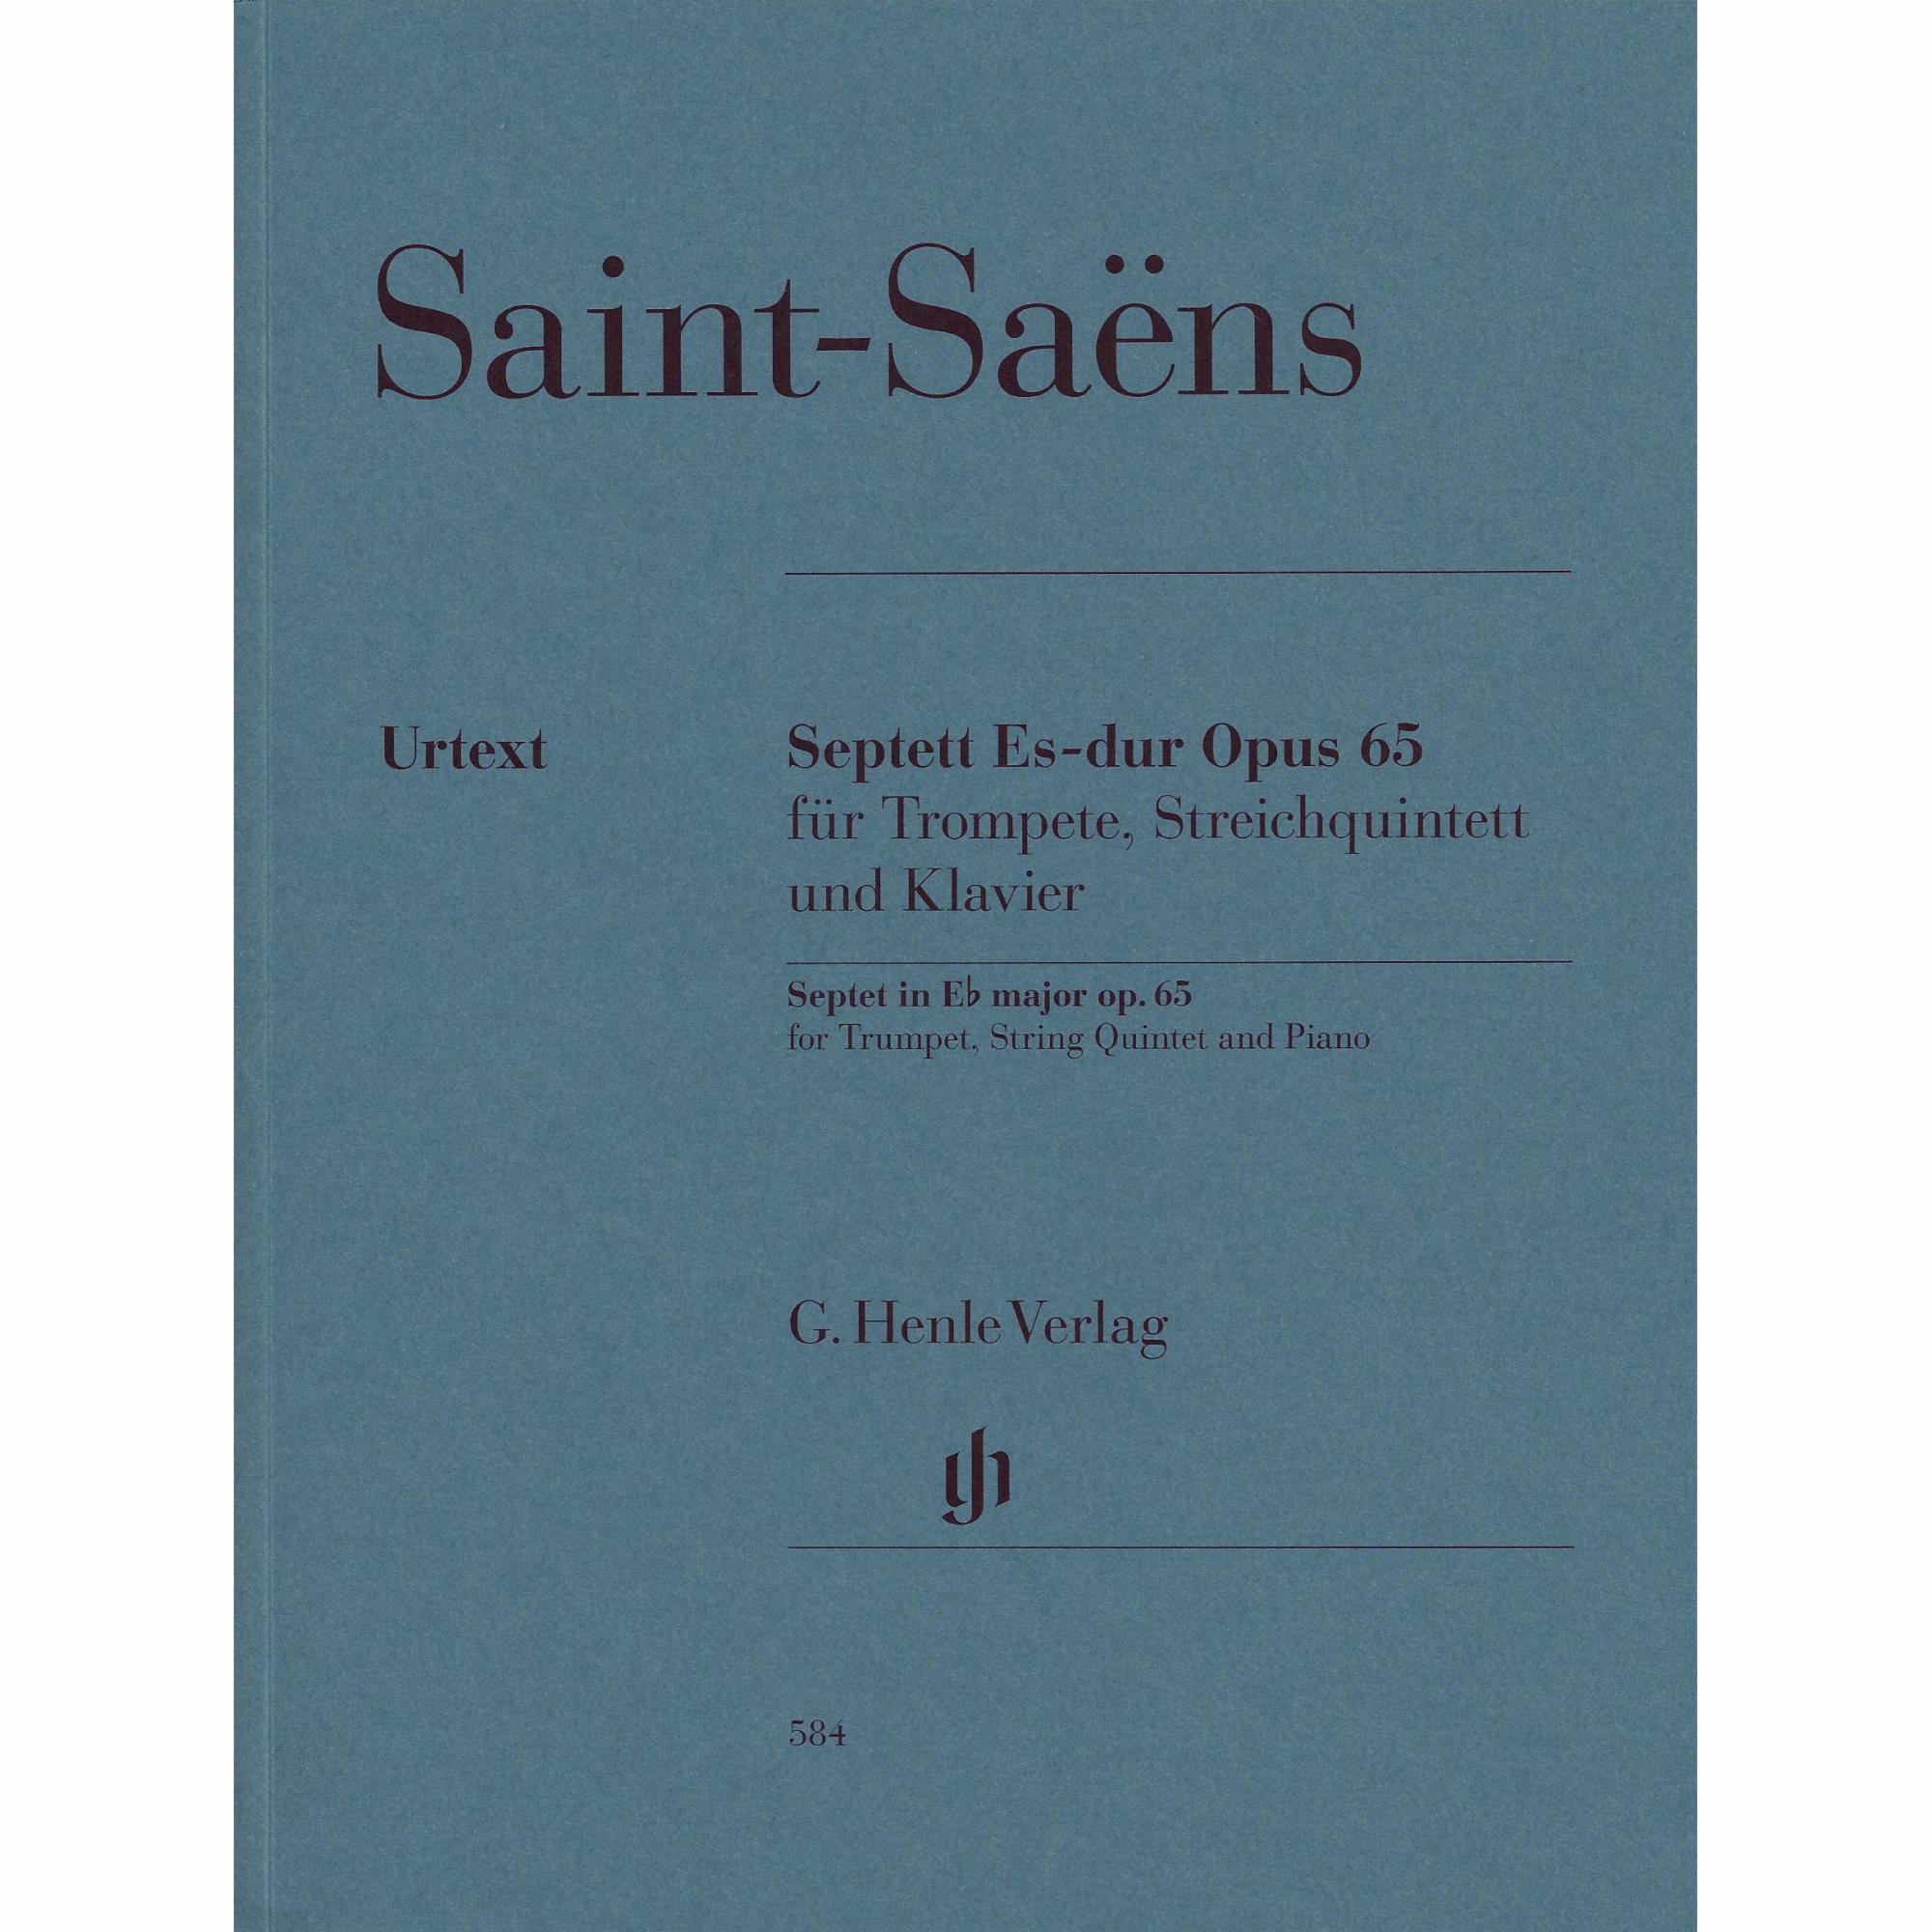 Saint-Saens -- Septet in E-flat Major, Op. 65 for Trumpet, String Quintet, and Piano